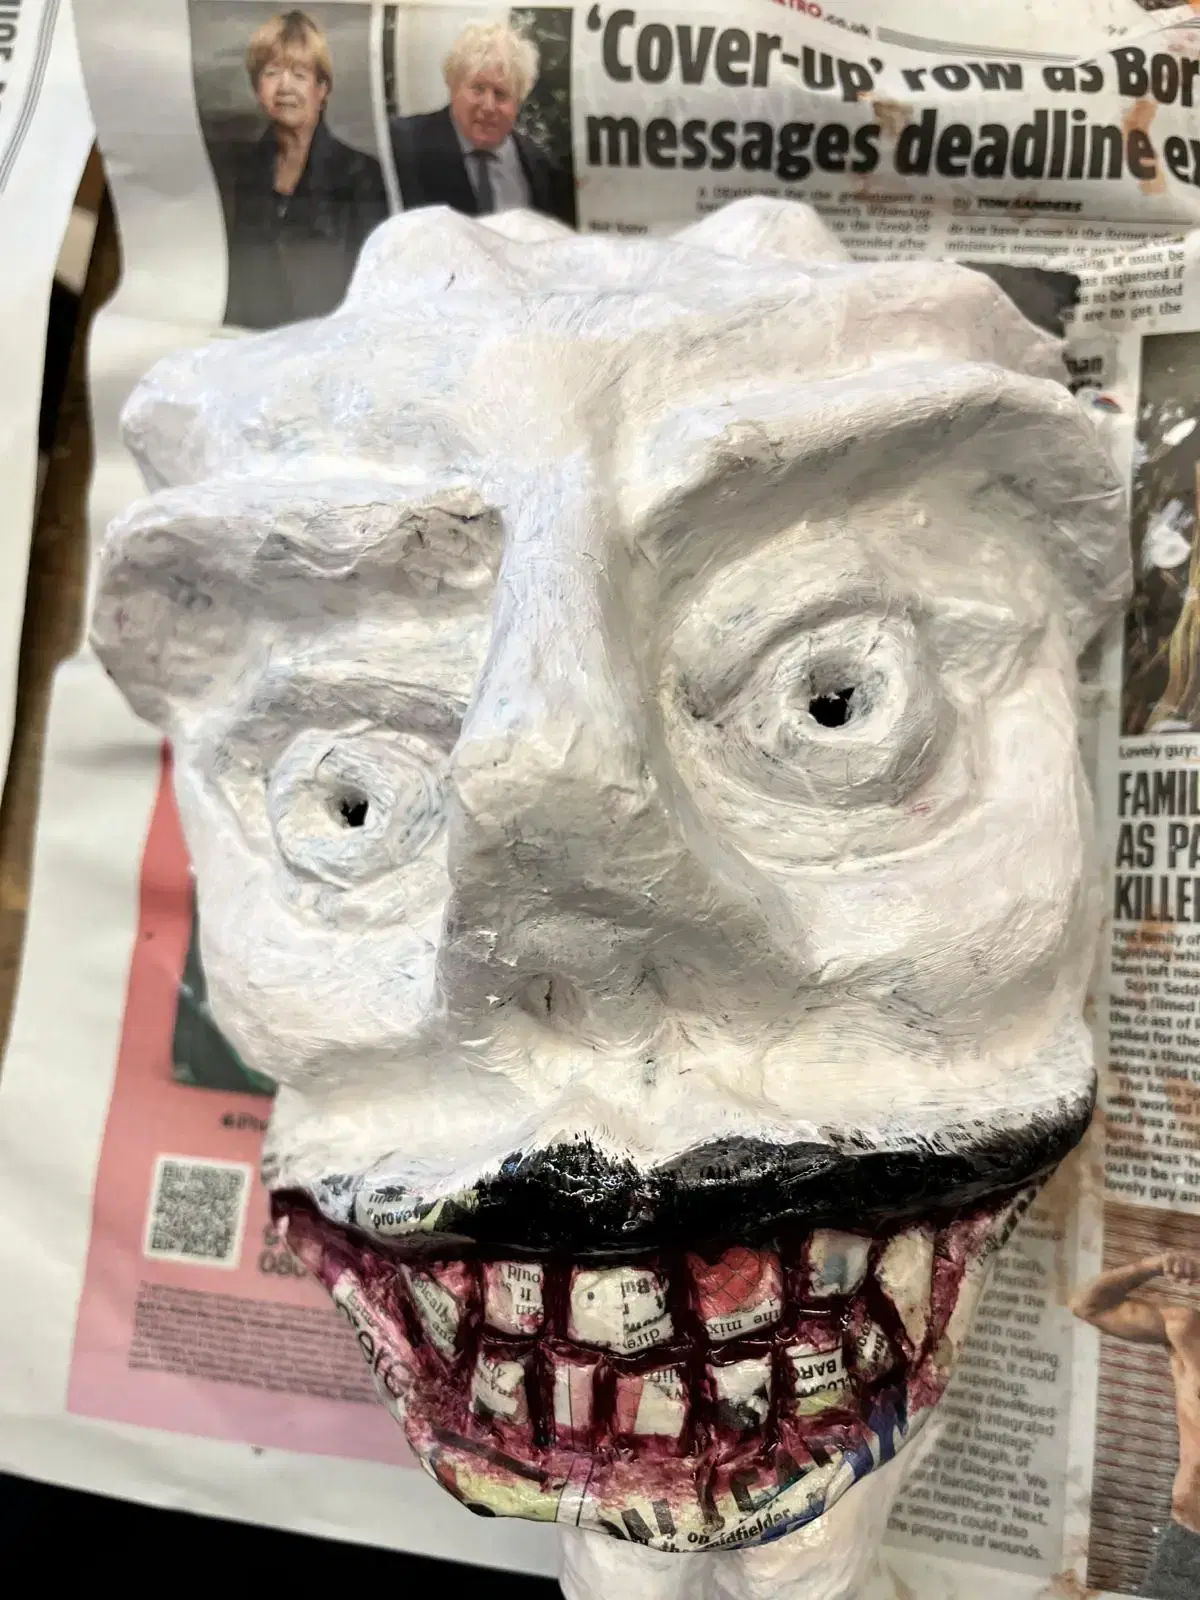 A close-up of a textured, painted clay or papier-mâché mask with exaggerated facial features, resting on an open newspaper.